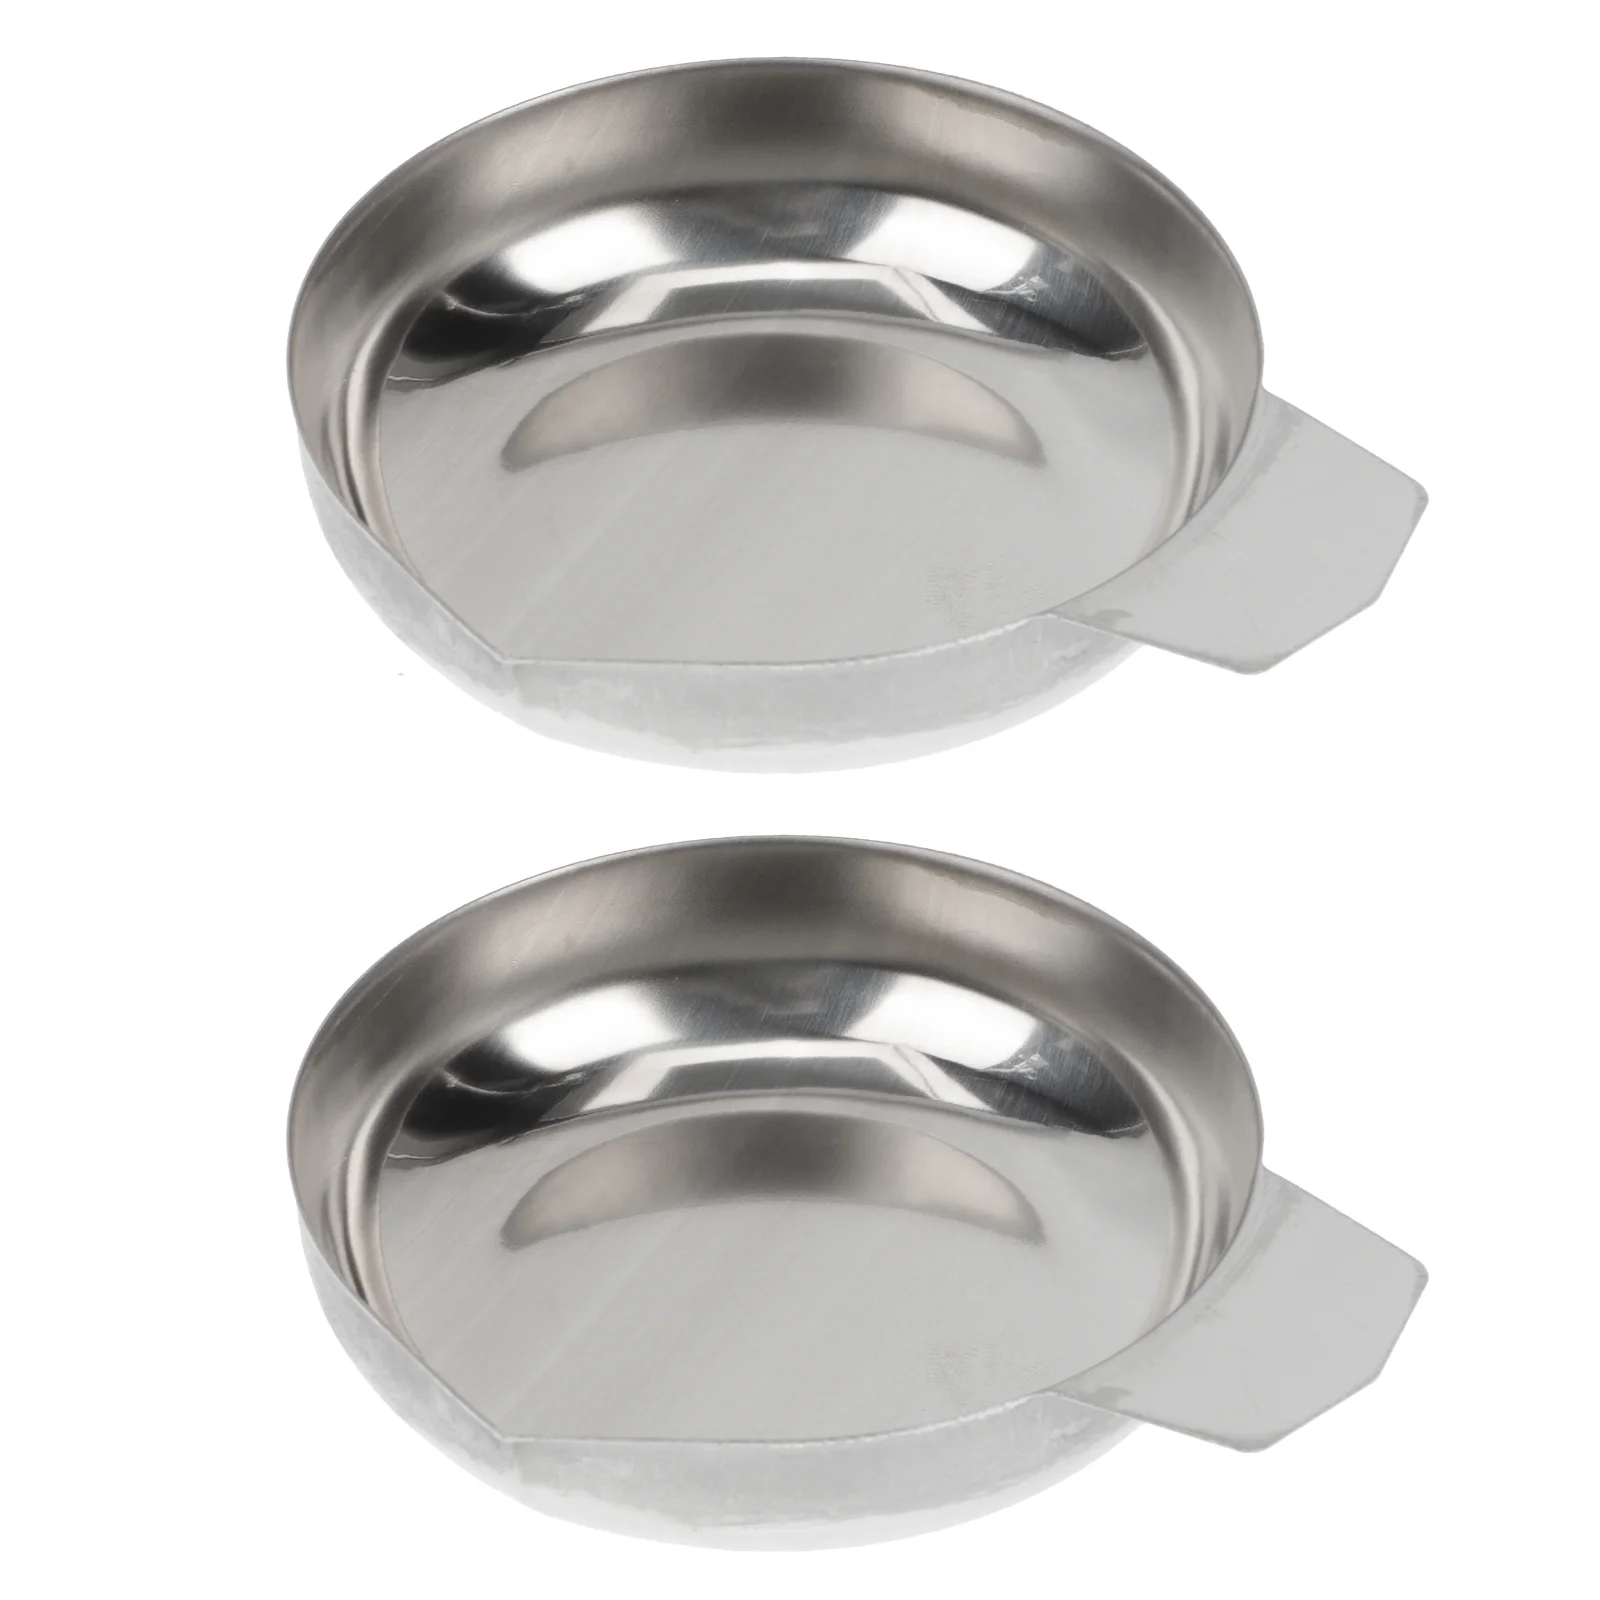 

2 Pcs Stainless Steel Weighing Pan Kitchen Supply Digital Scale Mini Electronic Tray Carat Trays Food Weight Loss Balance